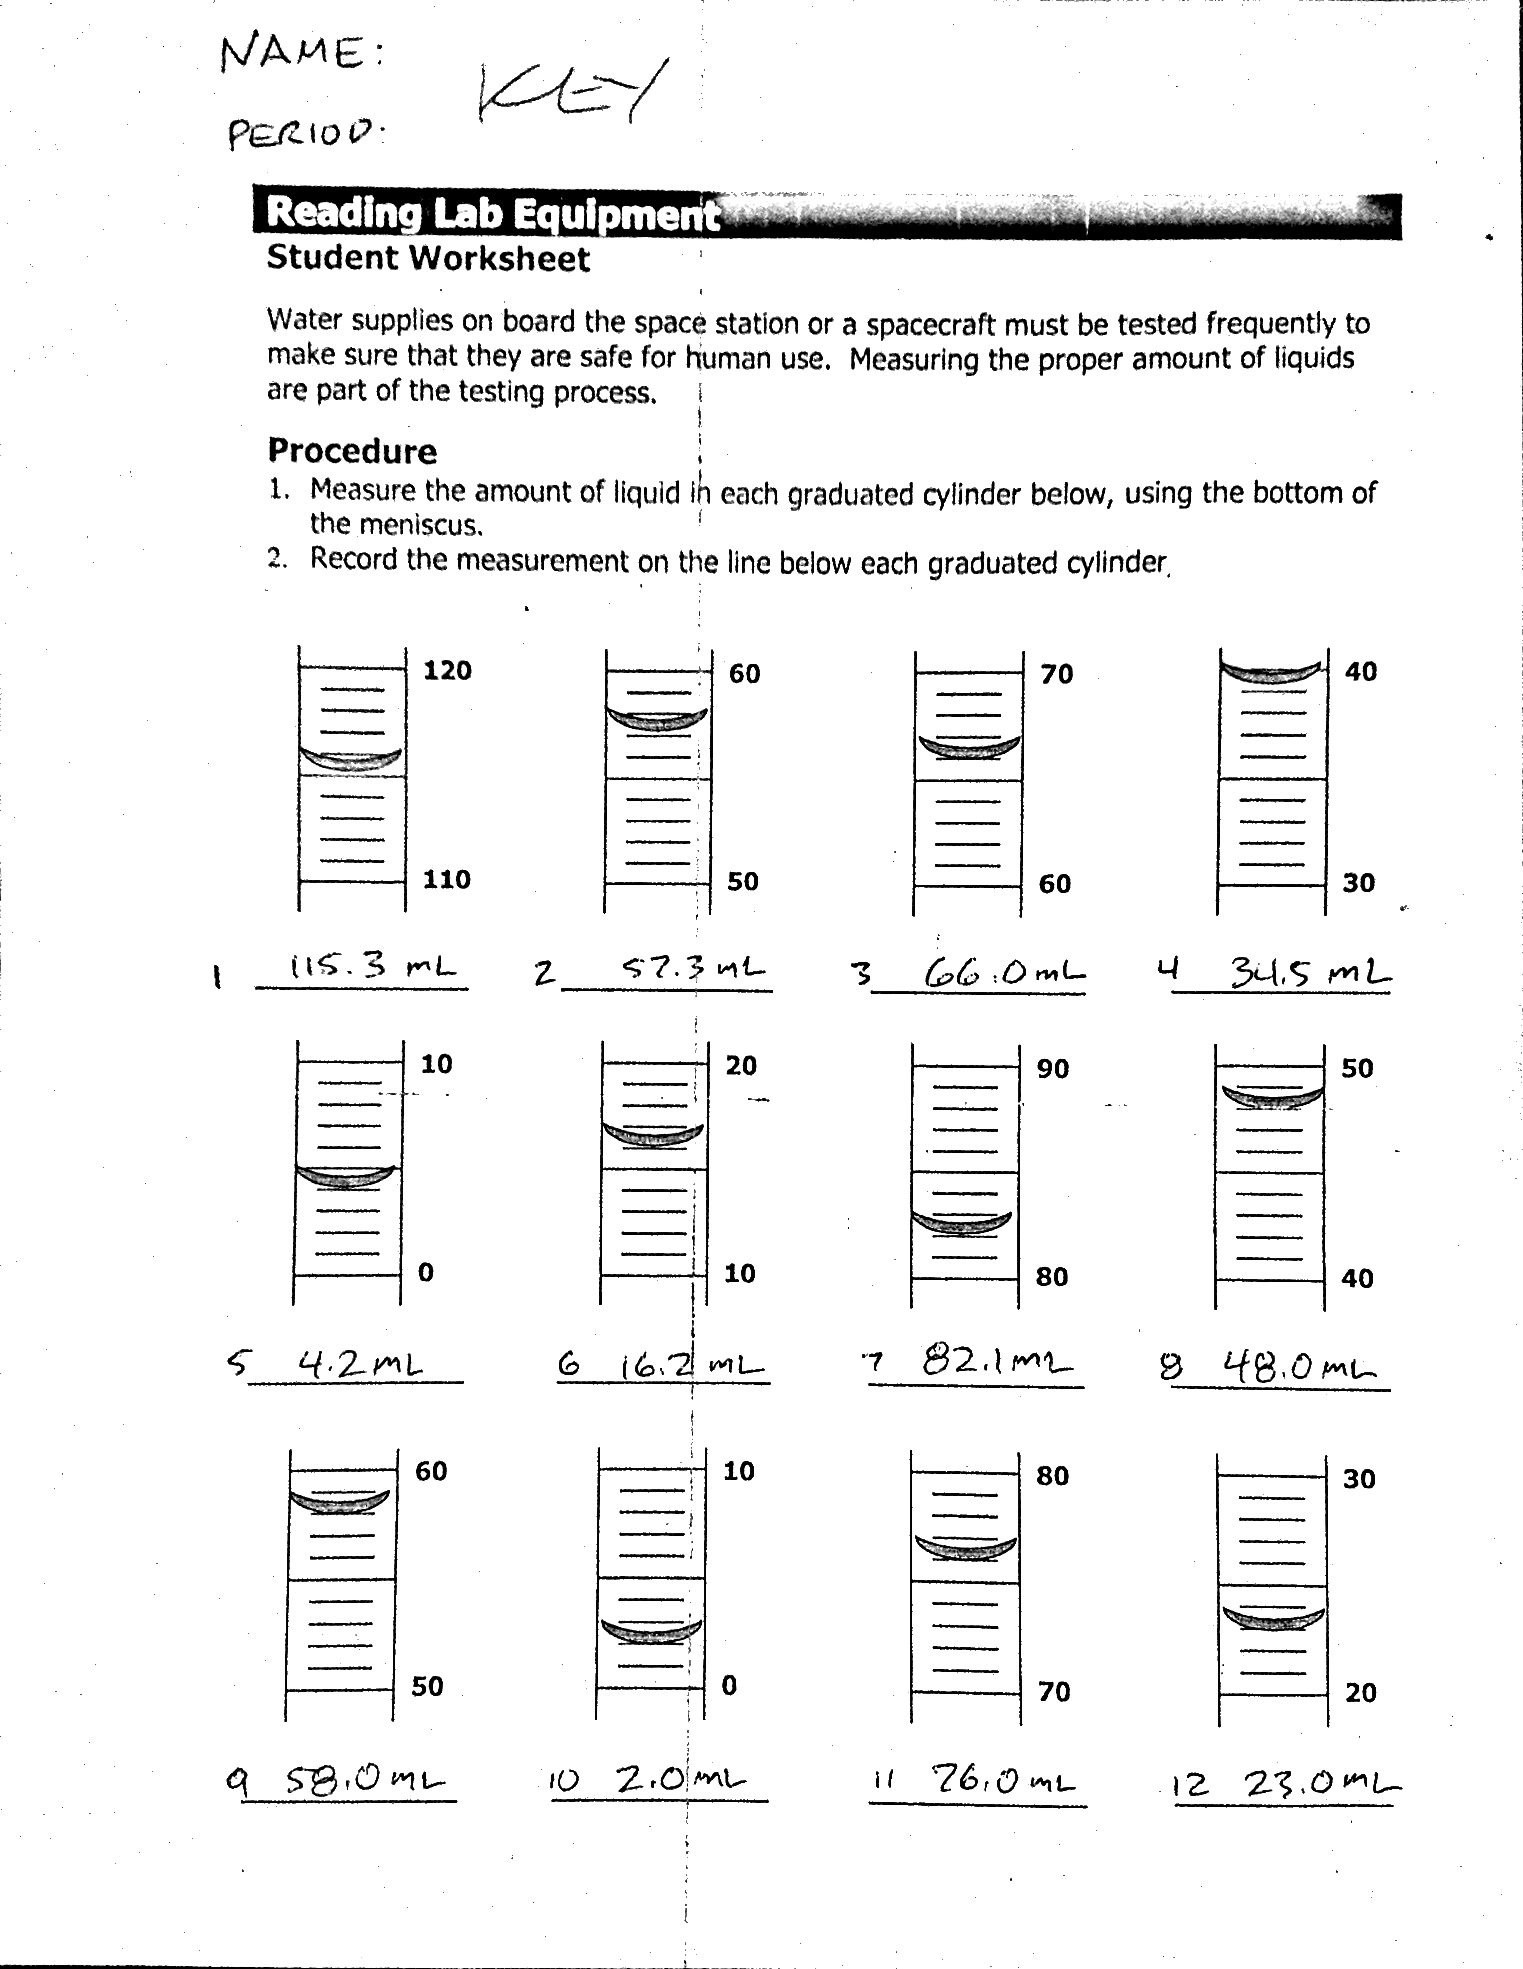 Significant Figures Worksheet Answers Reading Significant Figures Worksheet